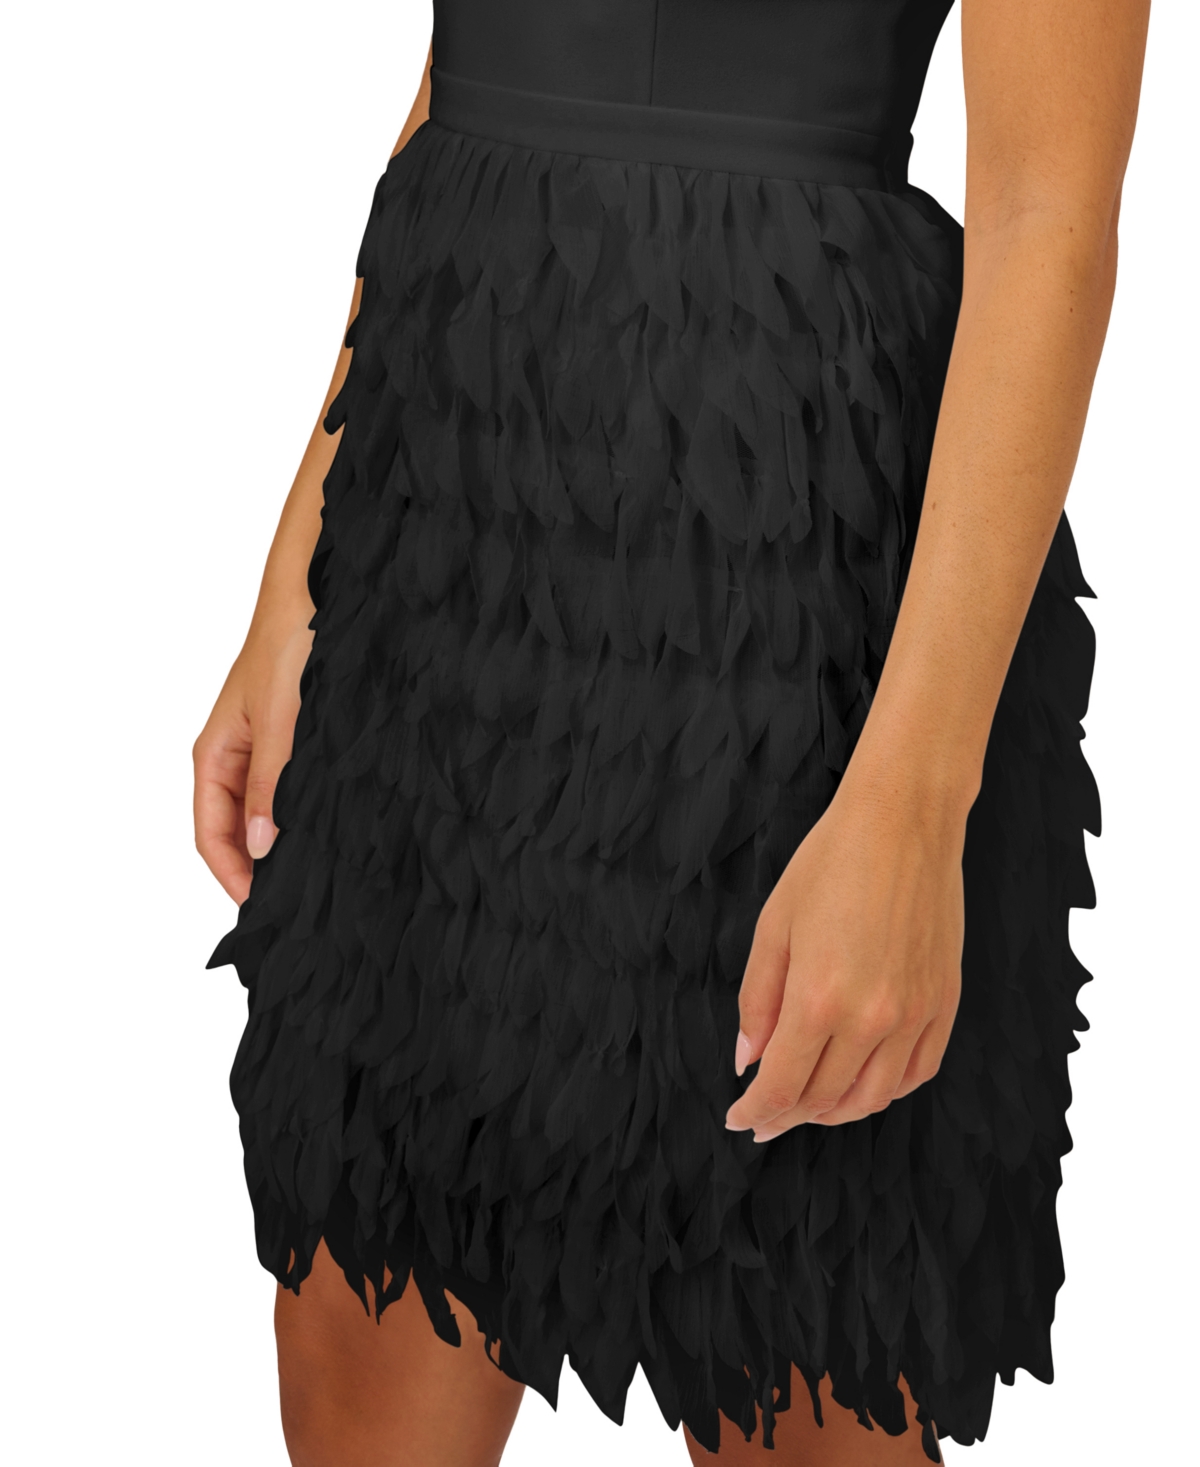 Shop Adrianna By Adrianna Papell Women's Chiffon Feather Cocktail Dress In Black